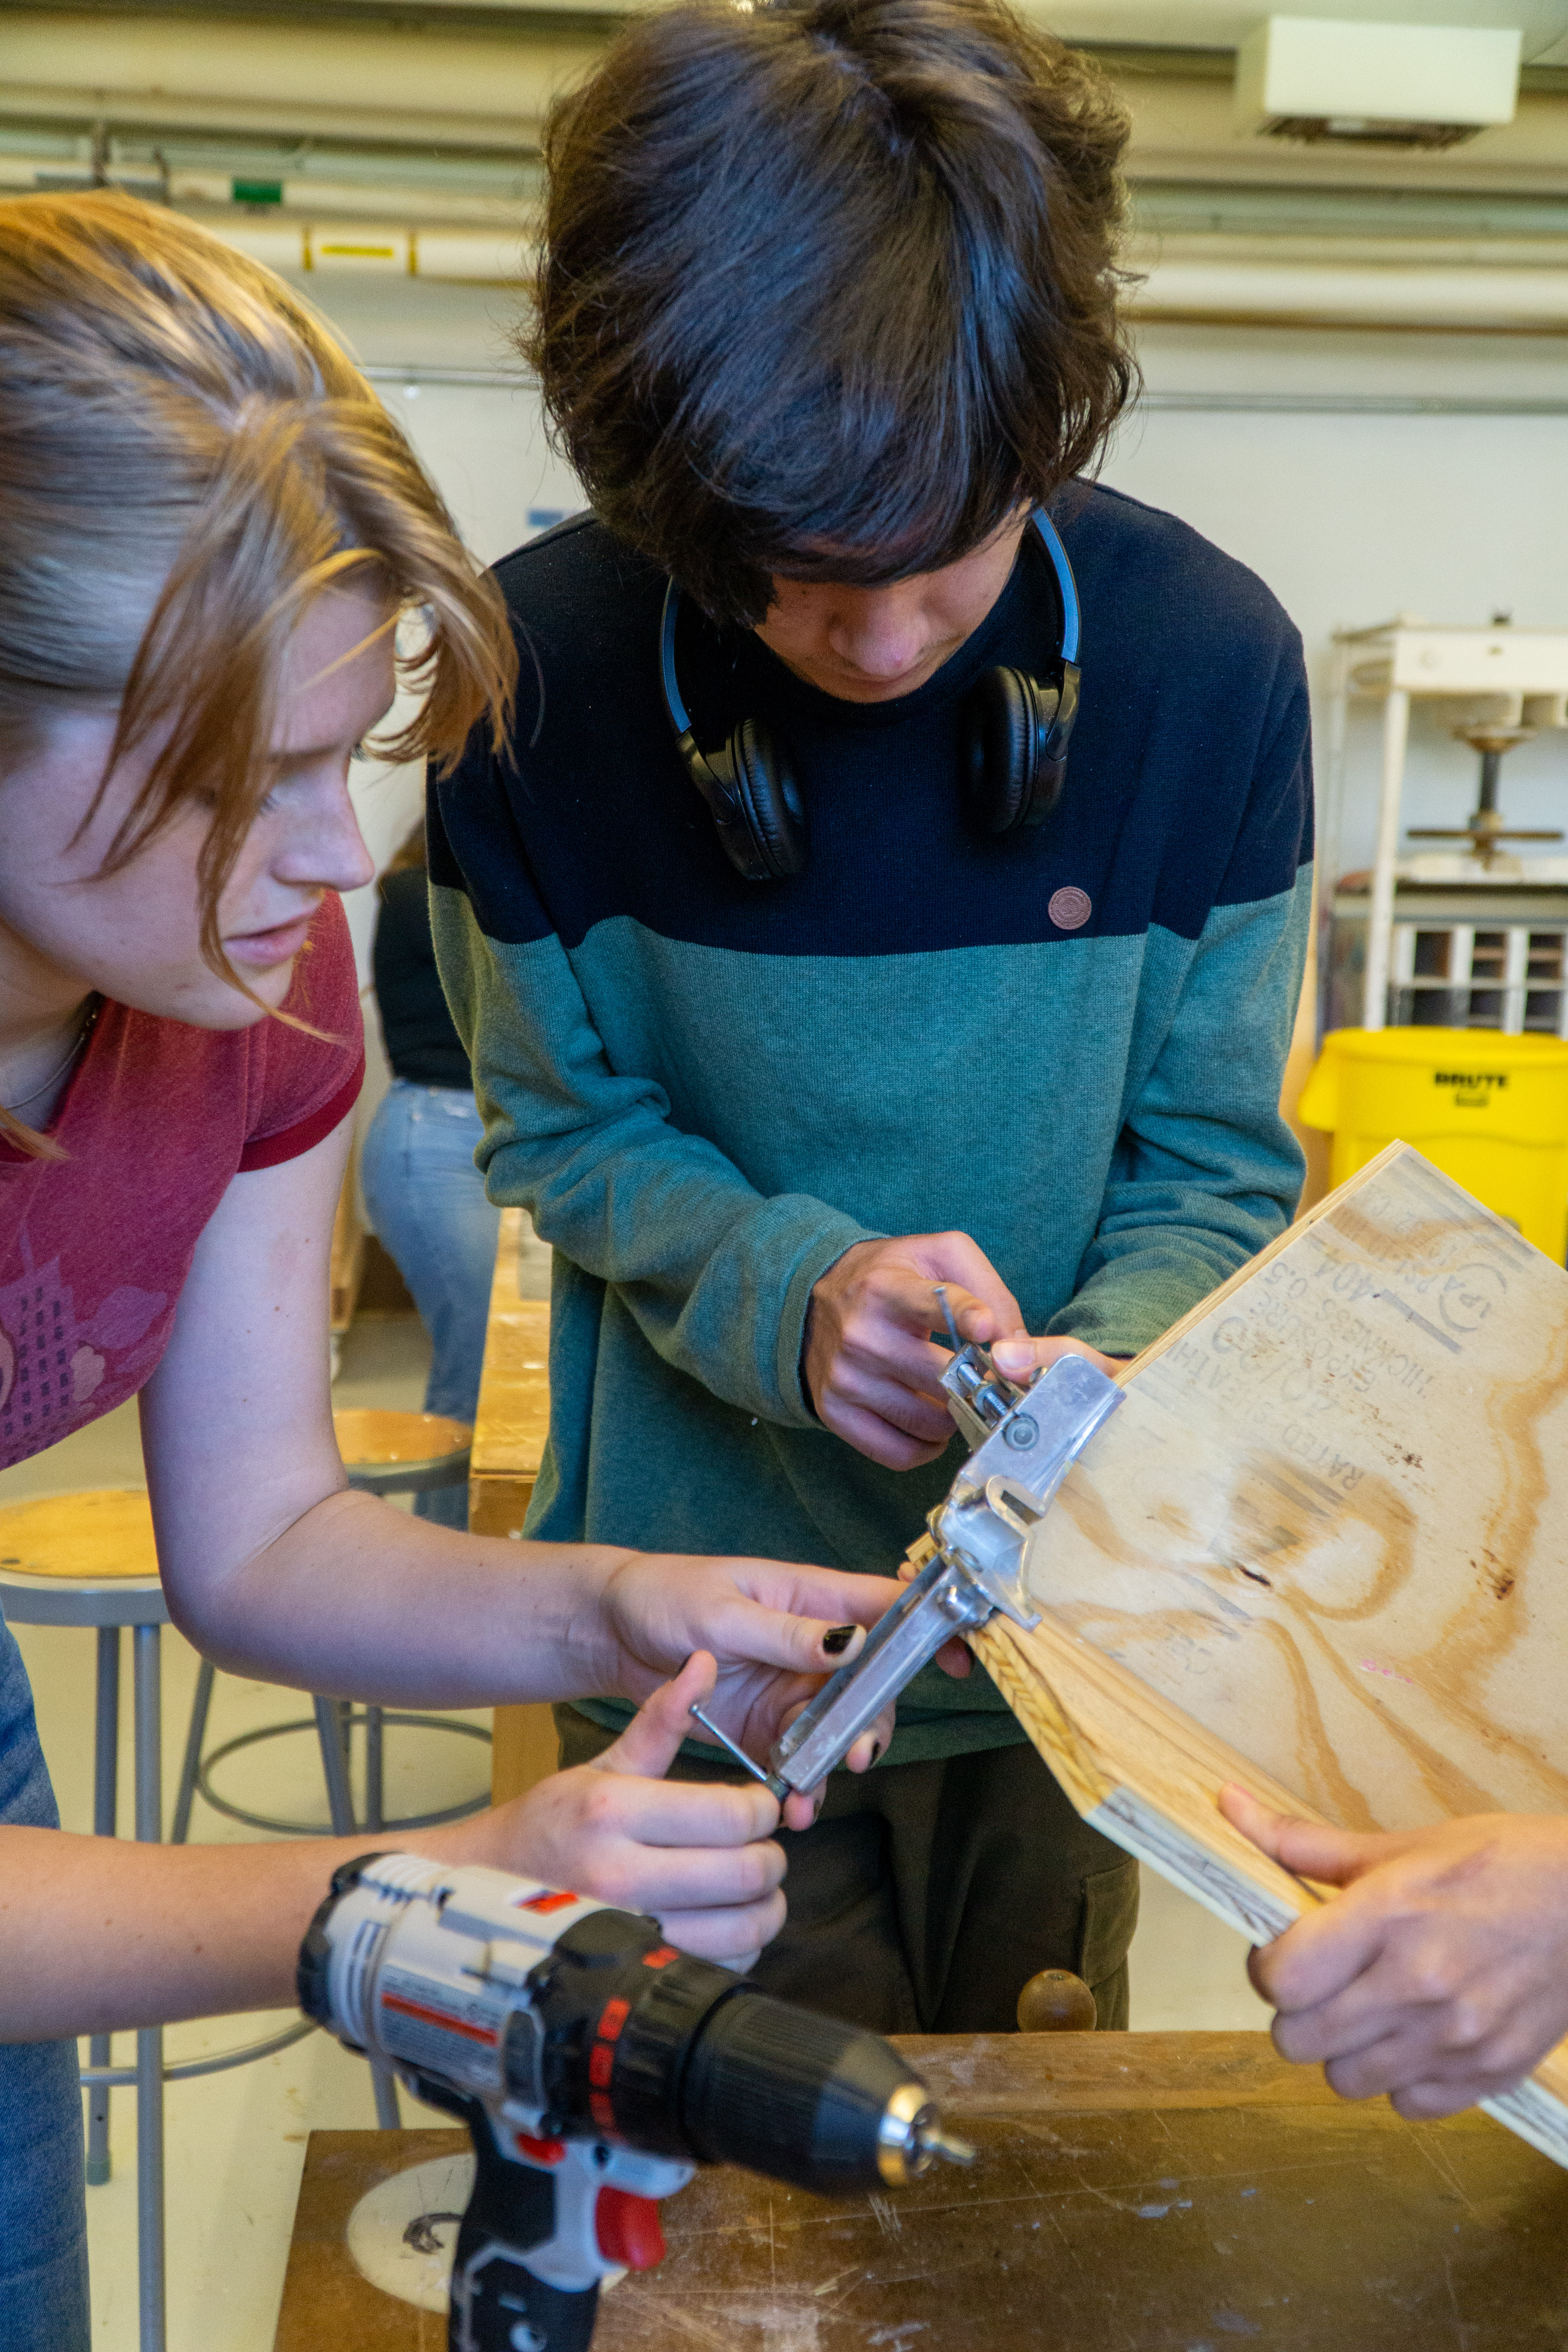 The team working in the College of Design’s woodworking space during the squirrel box-building event. Photo credit: Thomas Bordeaux, ARCH 2022.